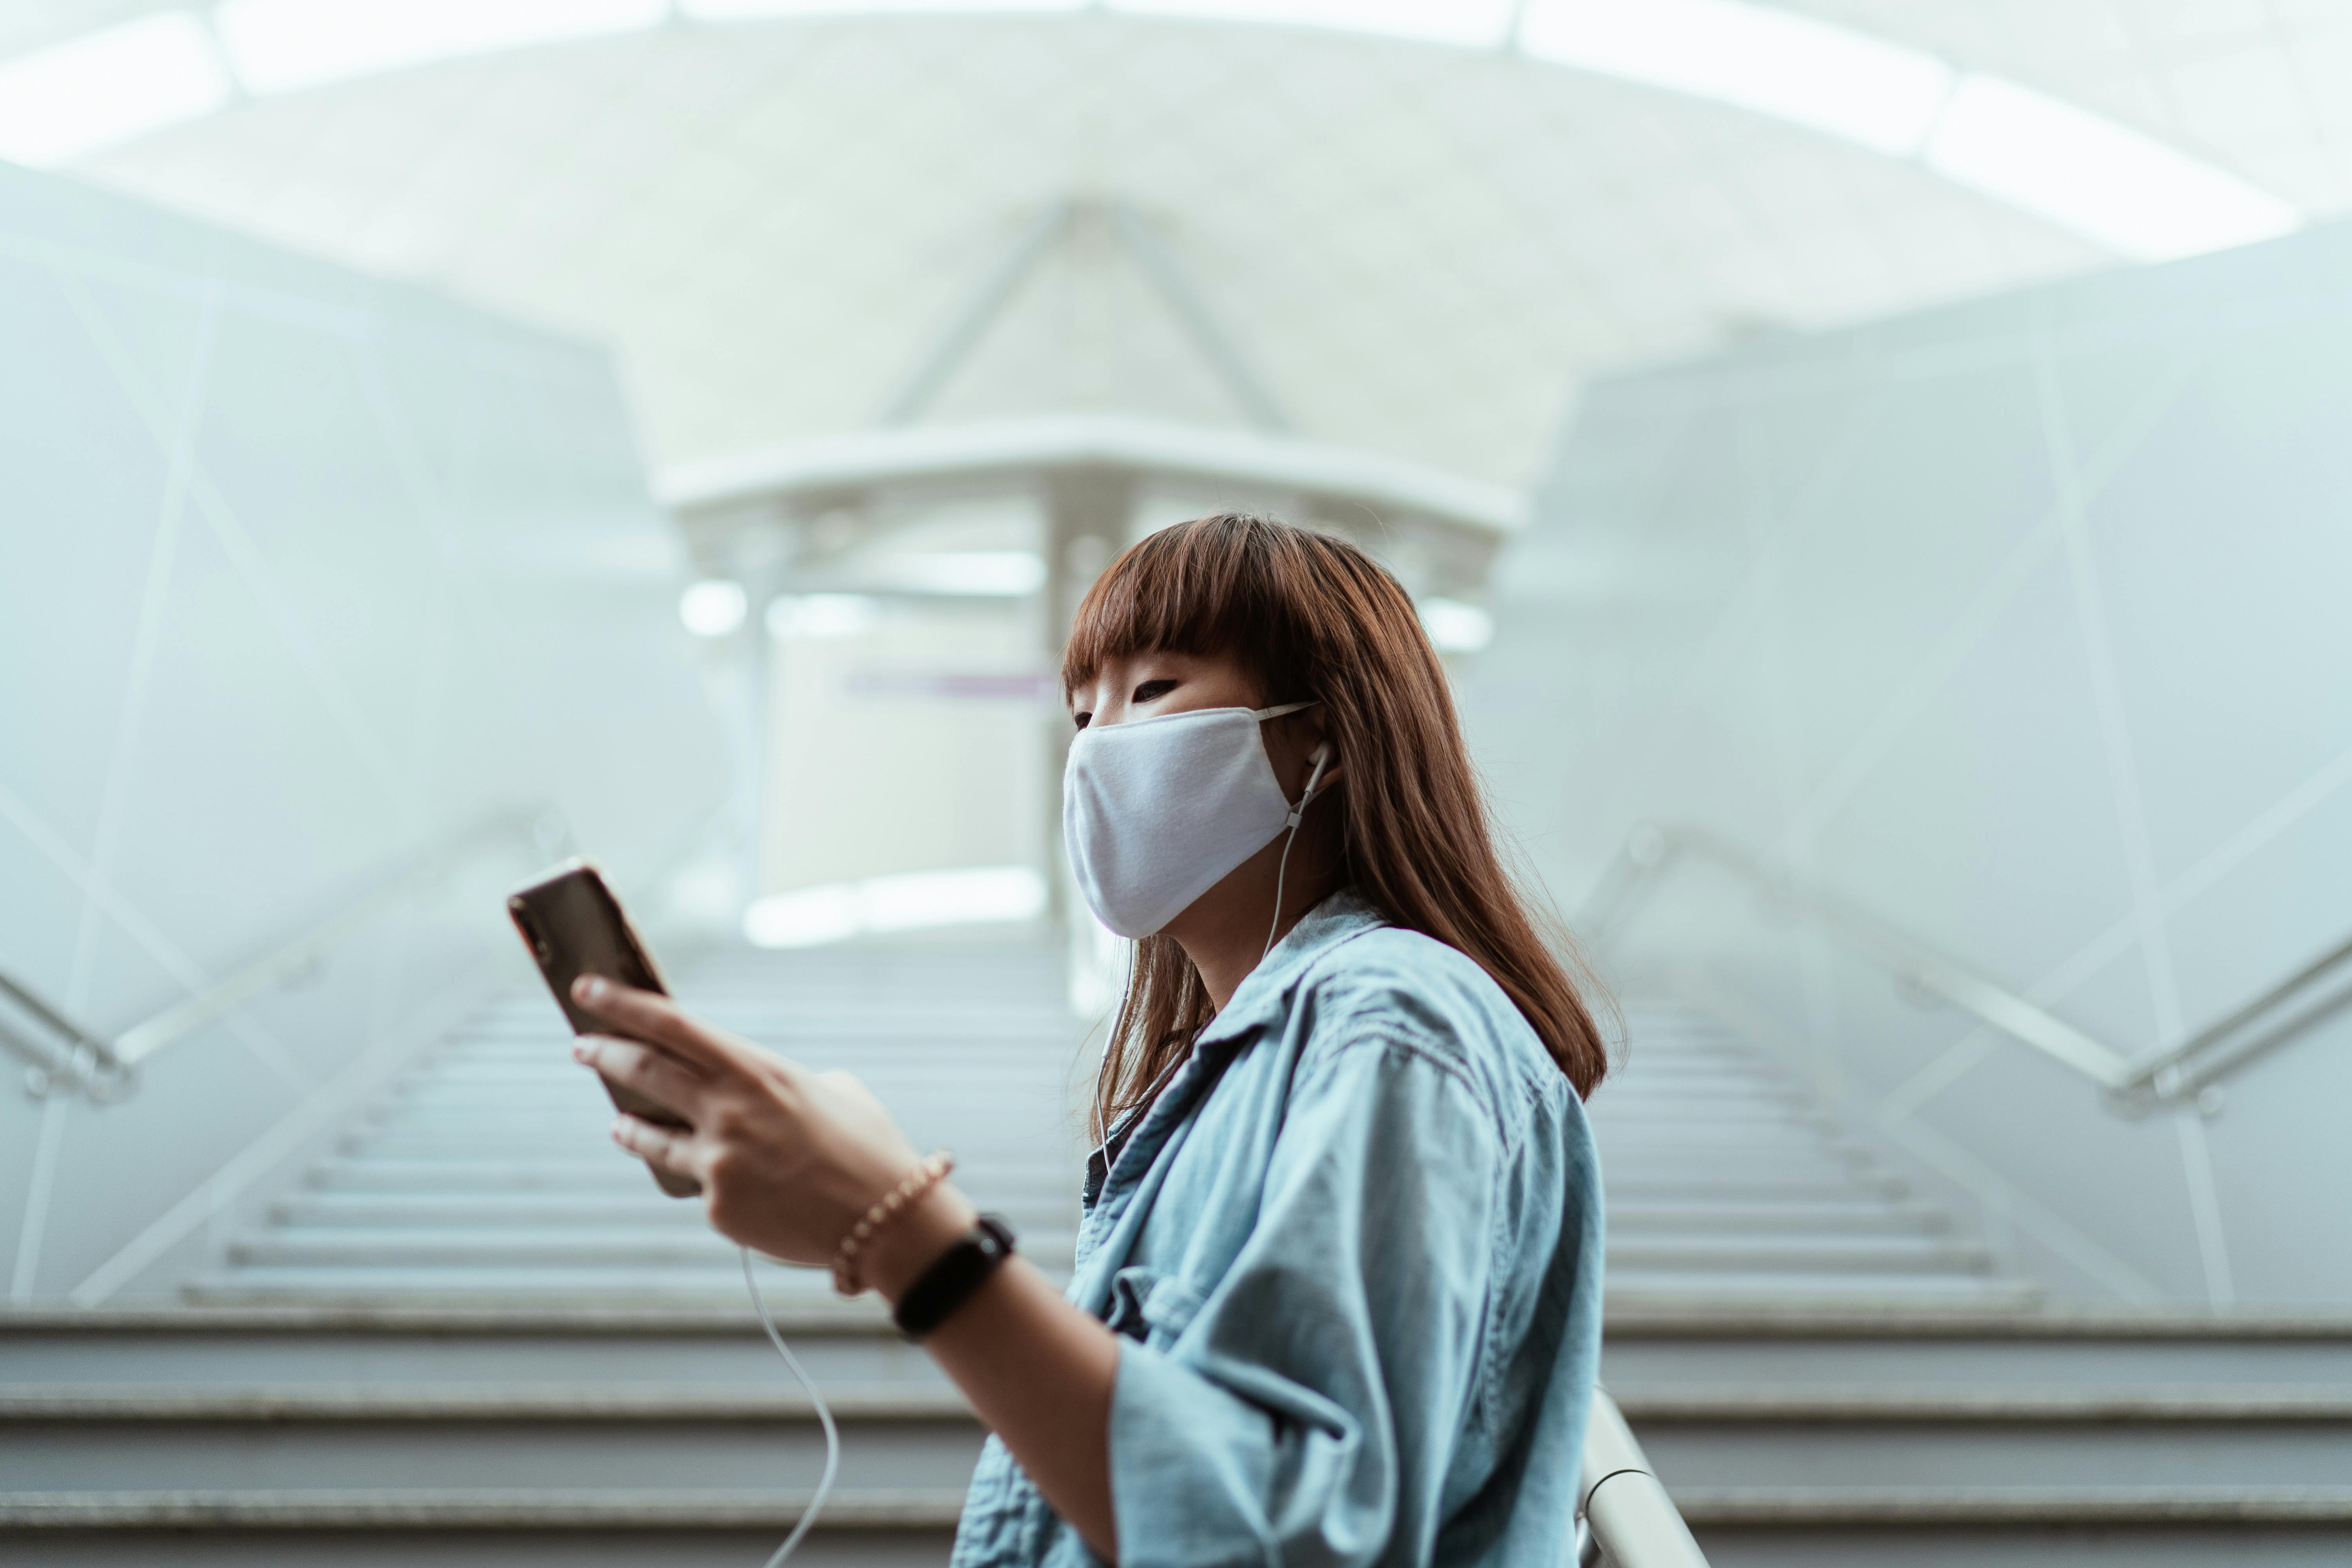 Digital Transformation Through Mobile Applications: The Future of Travel Industry - Travels during pandemic